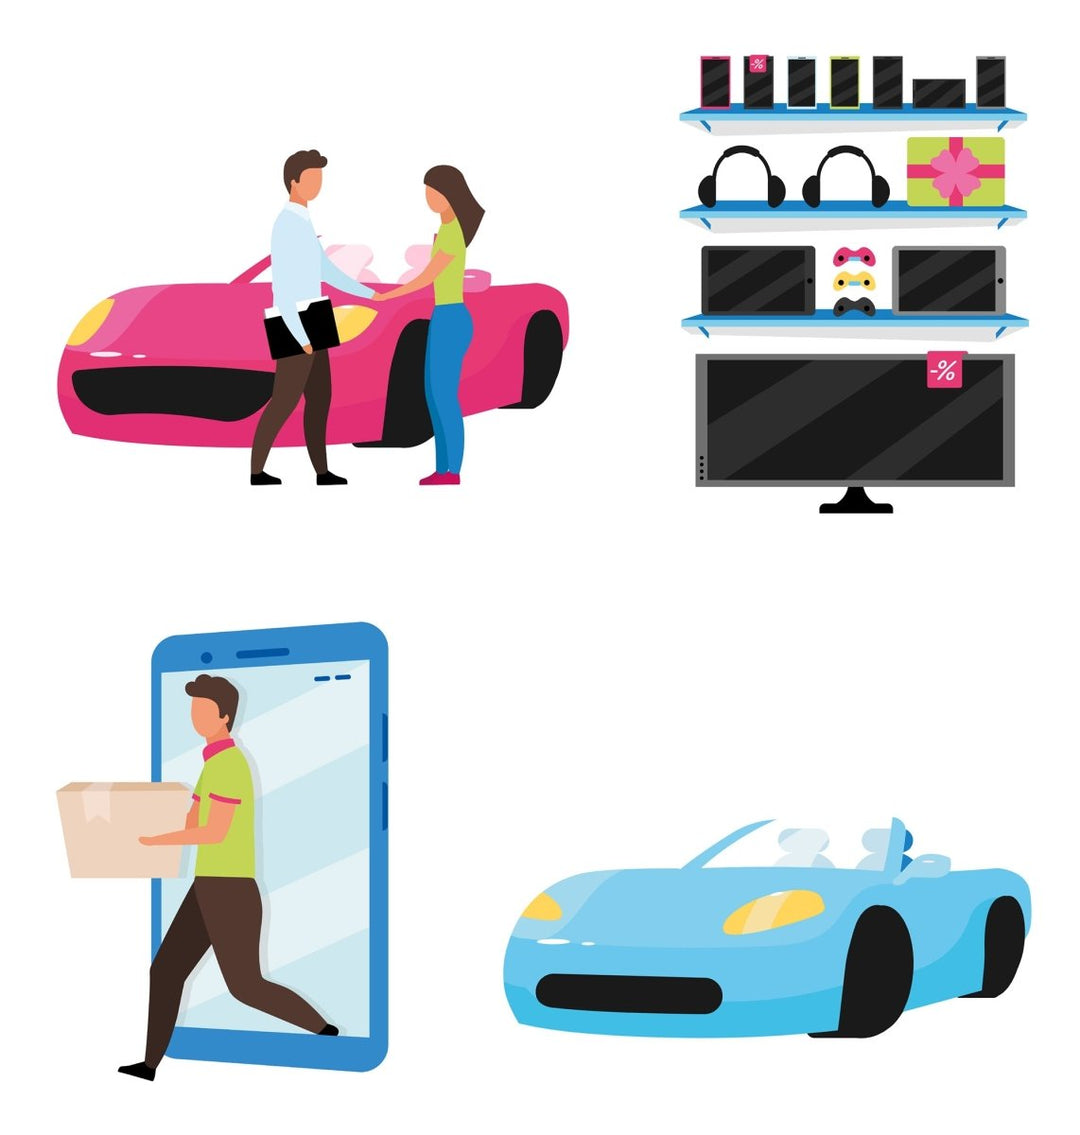 Online and store shopping flat illustration set